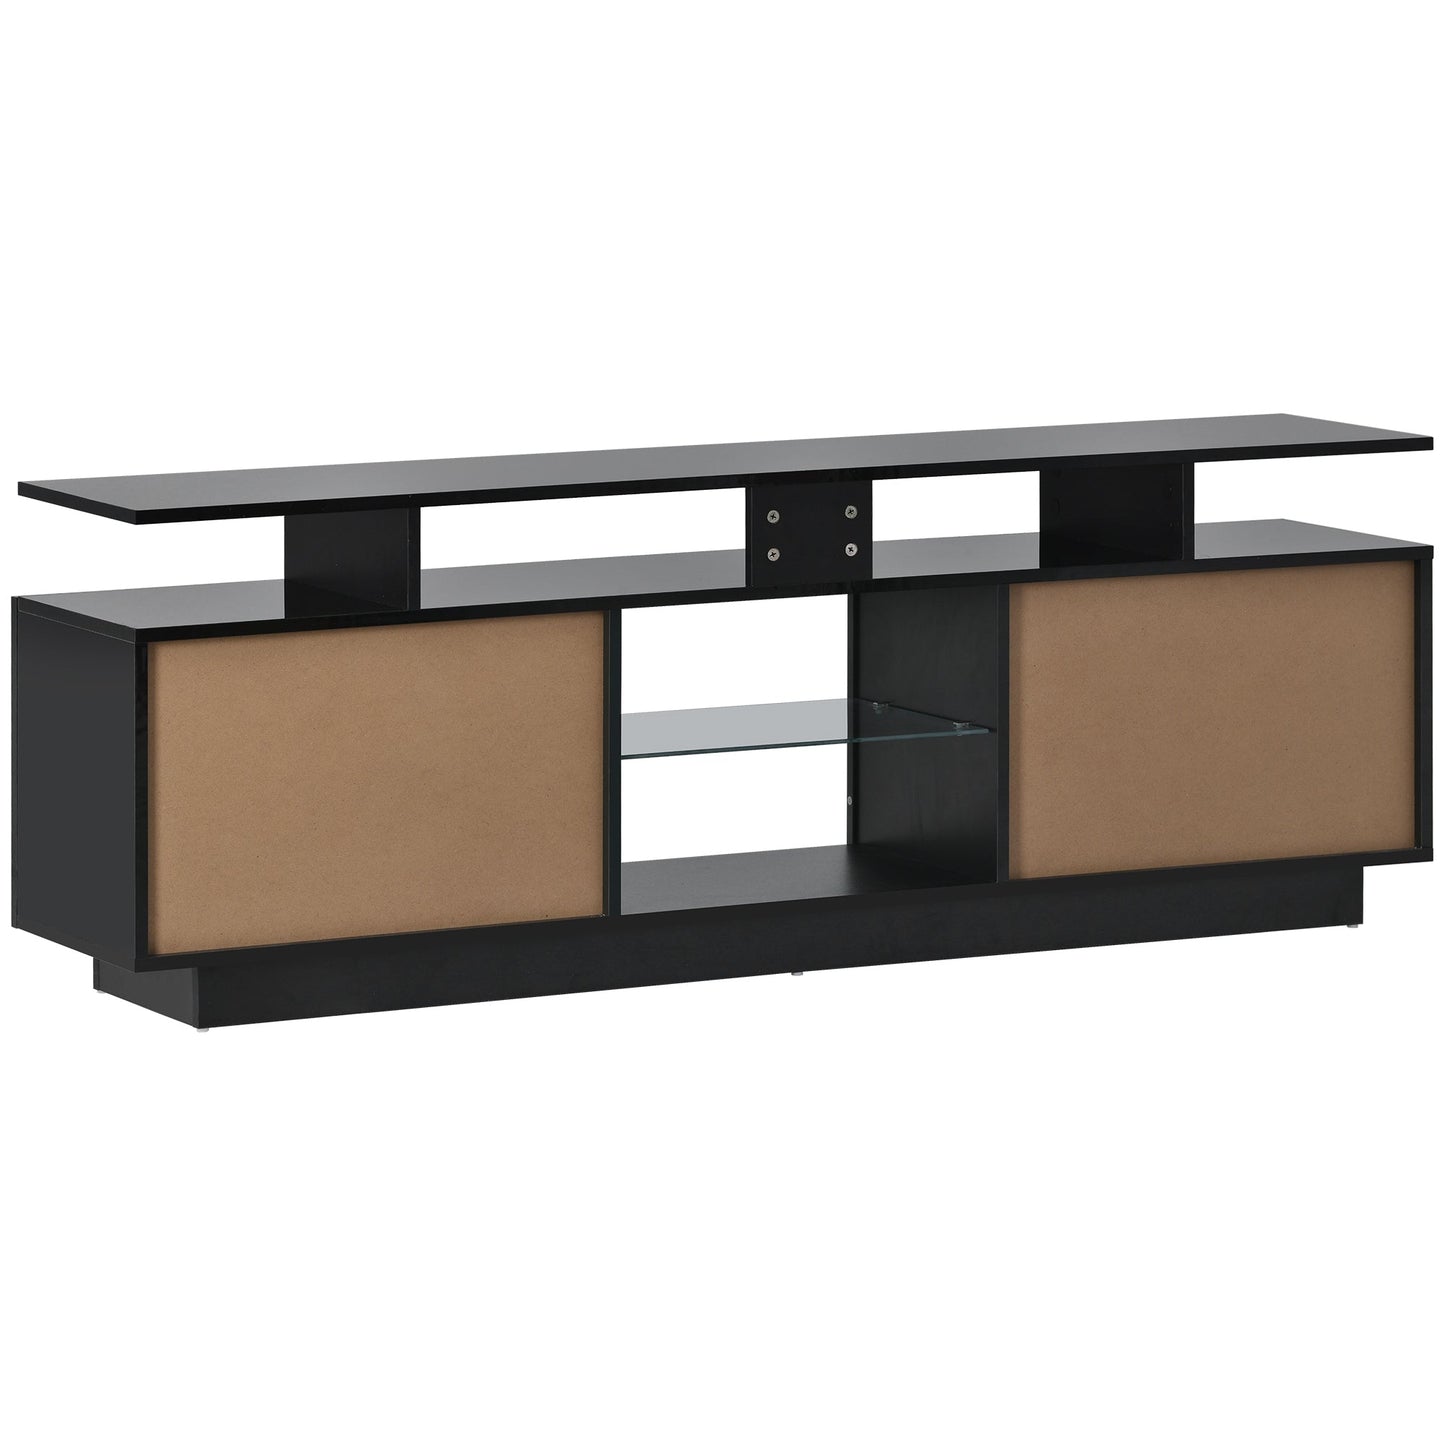 Latina Black Modern TV Stand  65inches with LED lights16 Colors